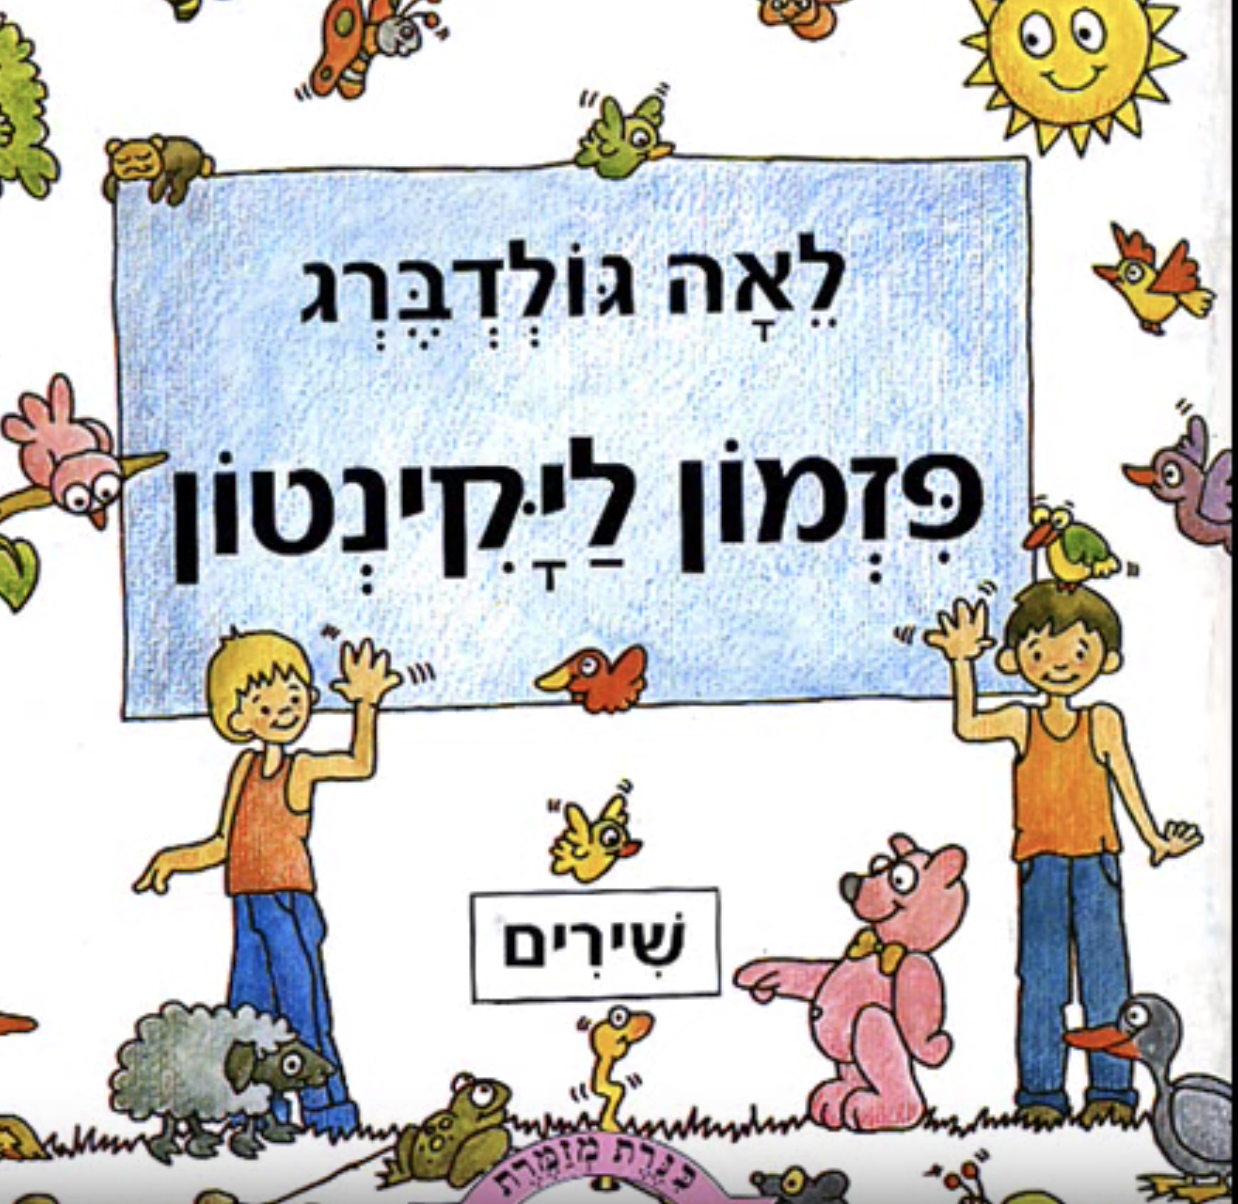 Hebrew enrichment resources that celebrate Israeli life and culture